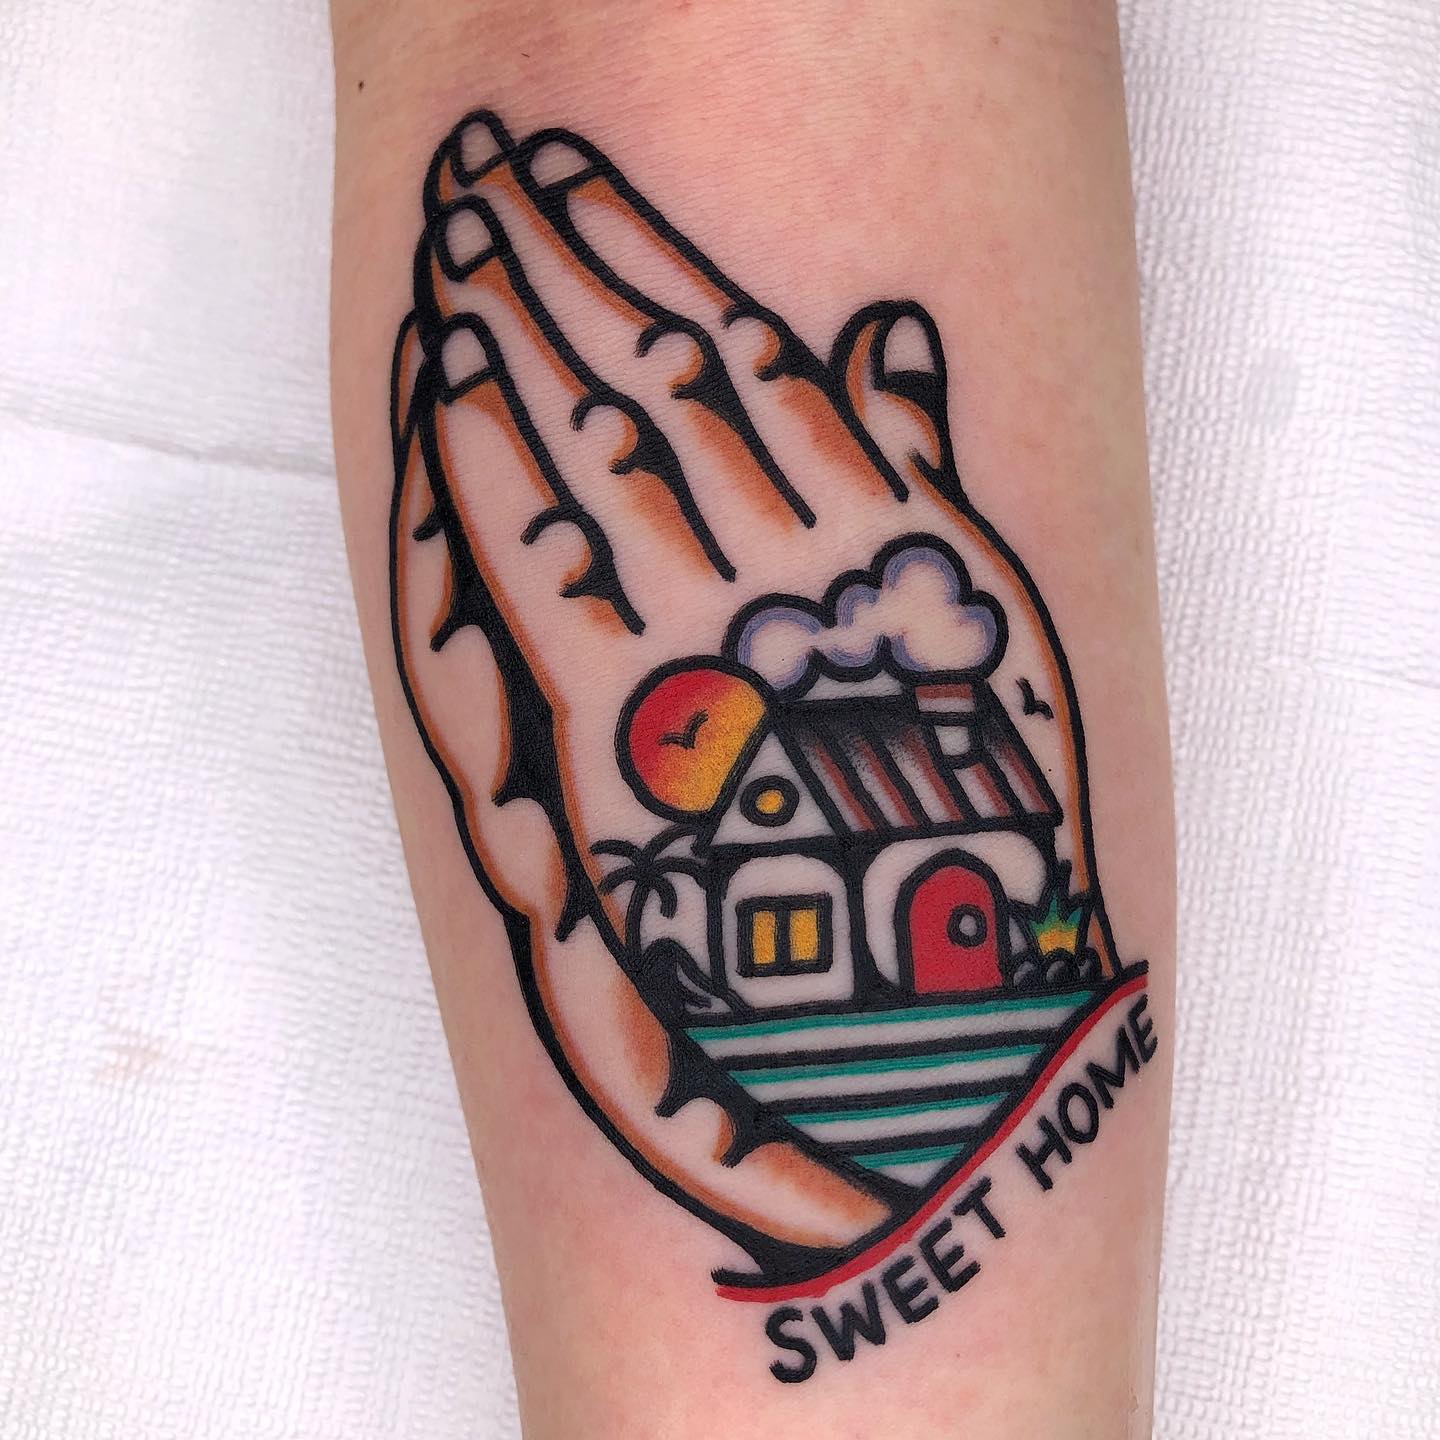  If you're fond of this kind of cartoonized tattoos, you should go for a tattoo like the one above. Home is where you feel safe, right? Your religion may be your home, too.